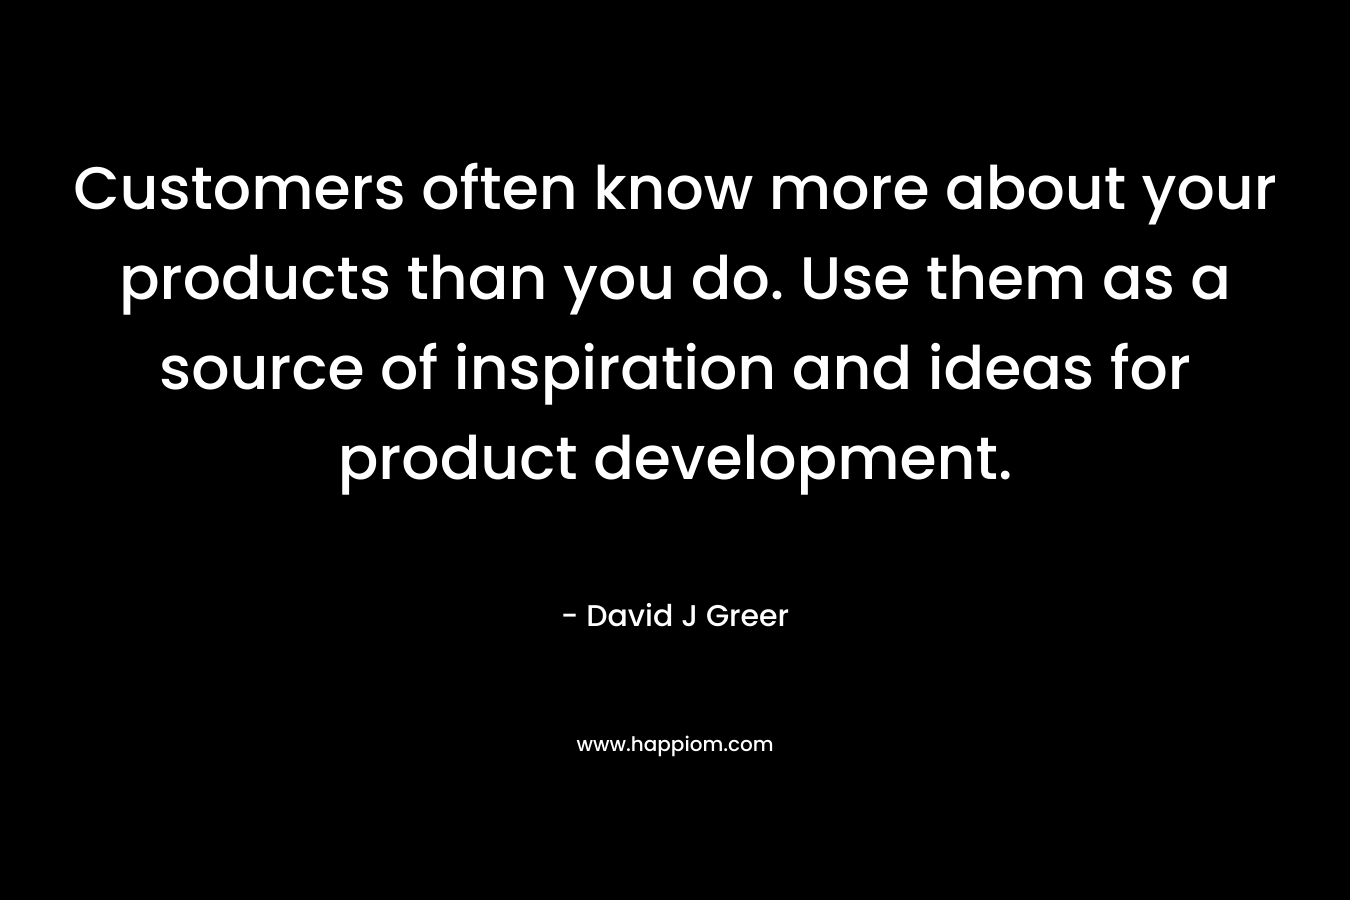 Customers often know more about your products than you do. Use them as a source of inspiration and ideas for product development. – David J Greer